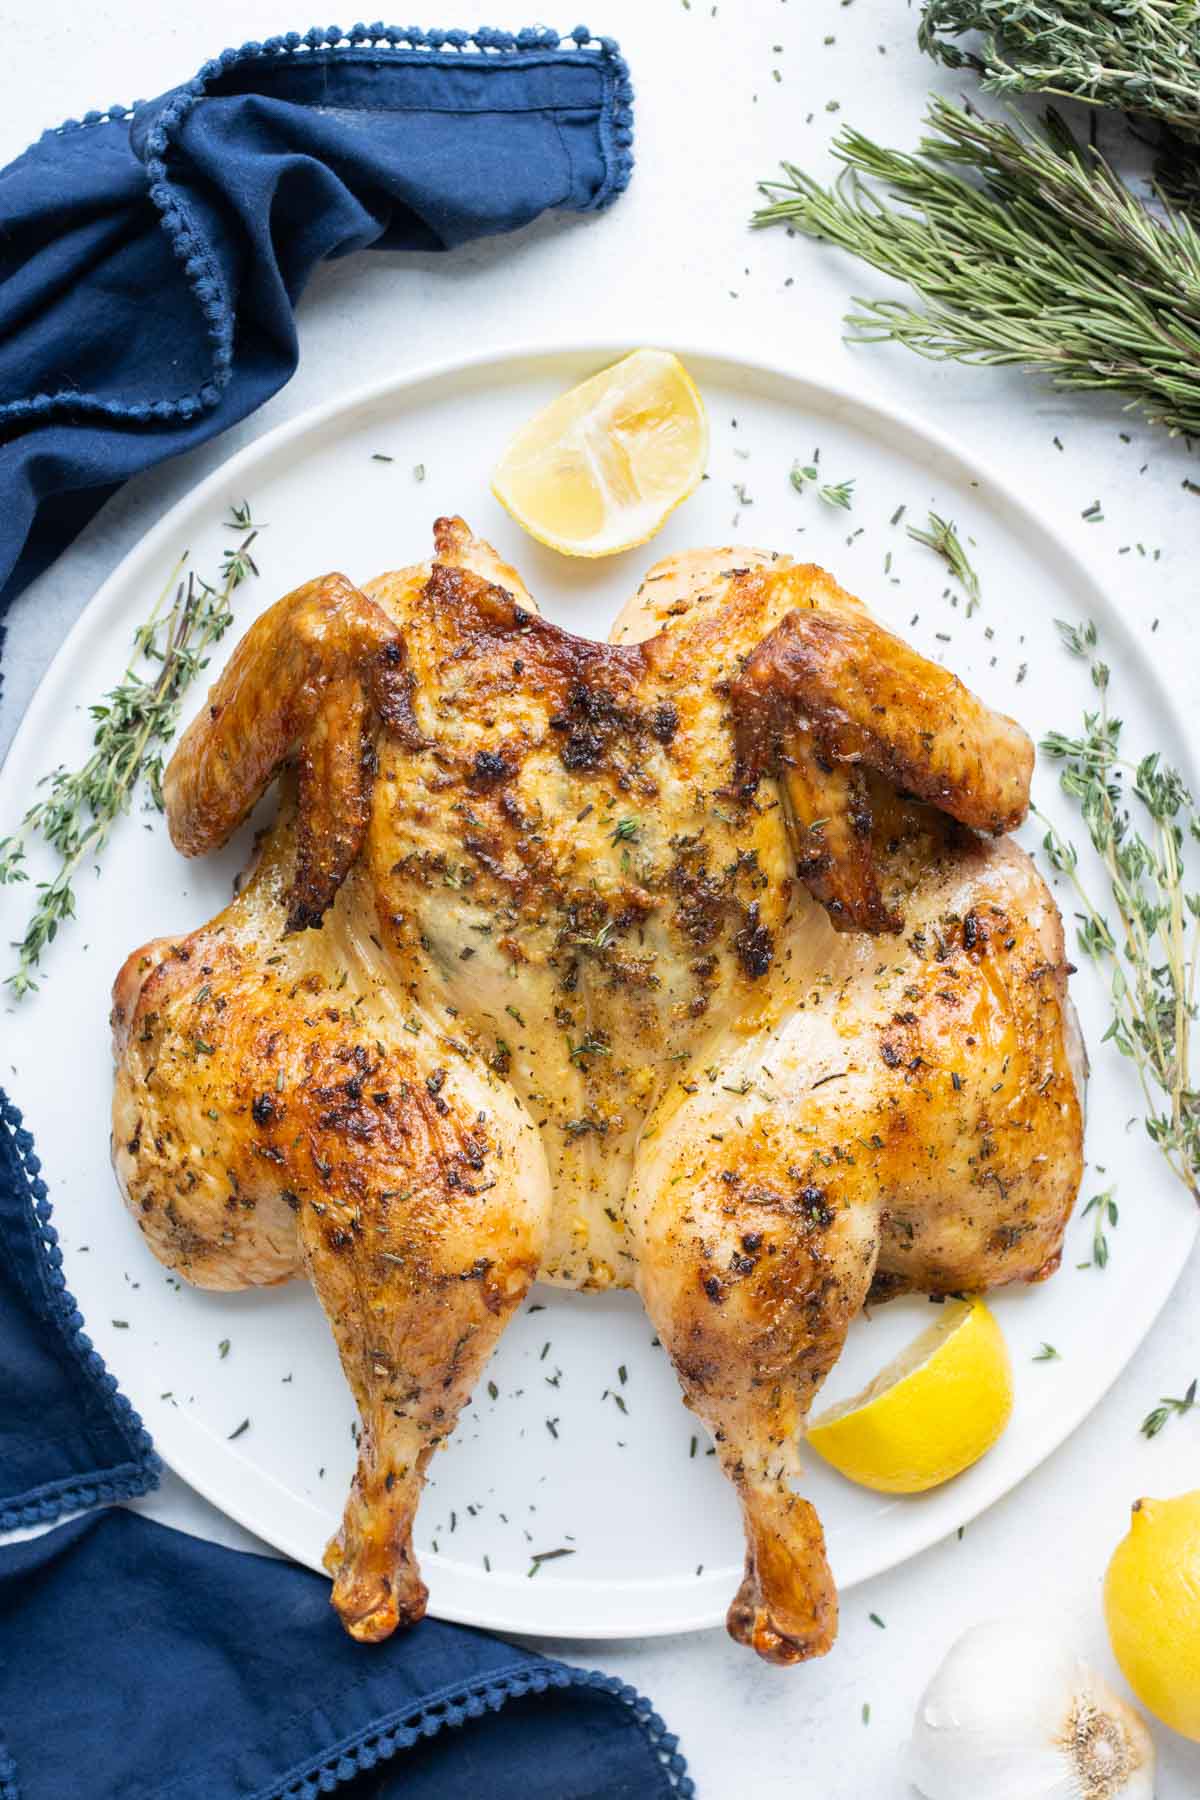 A seasoned and baked chicken is on a serving dish.